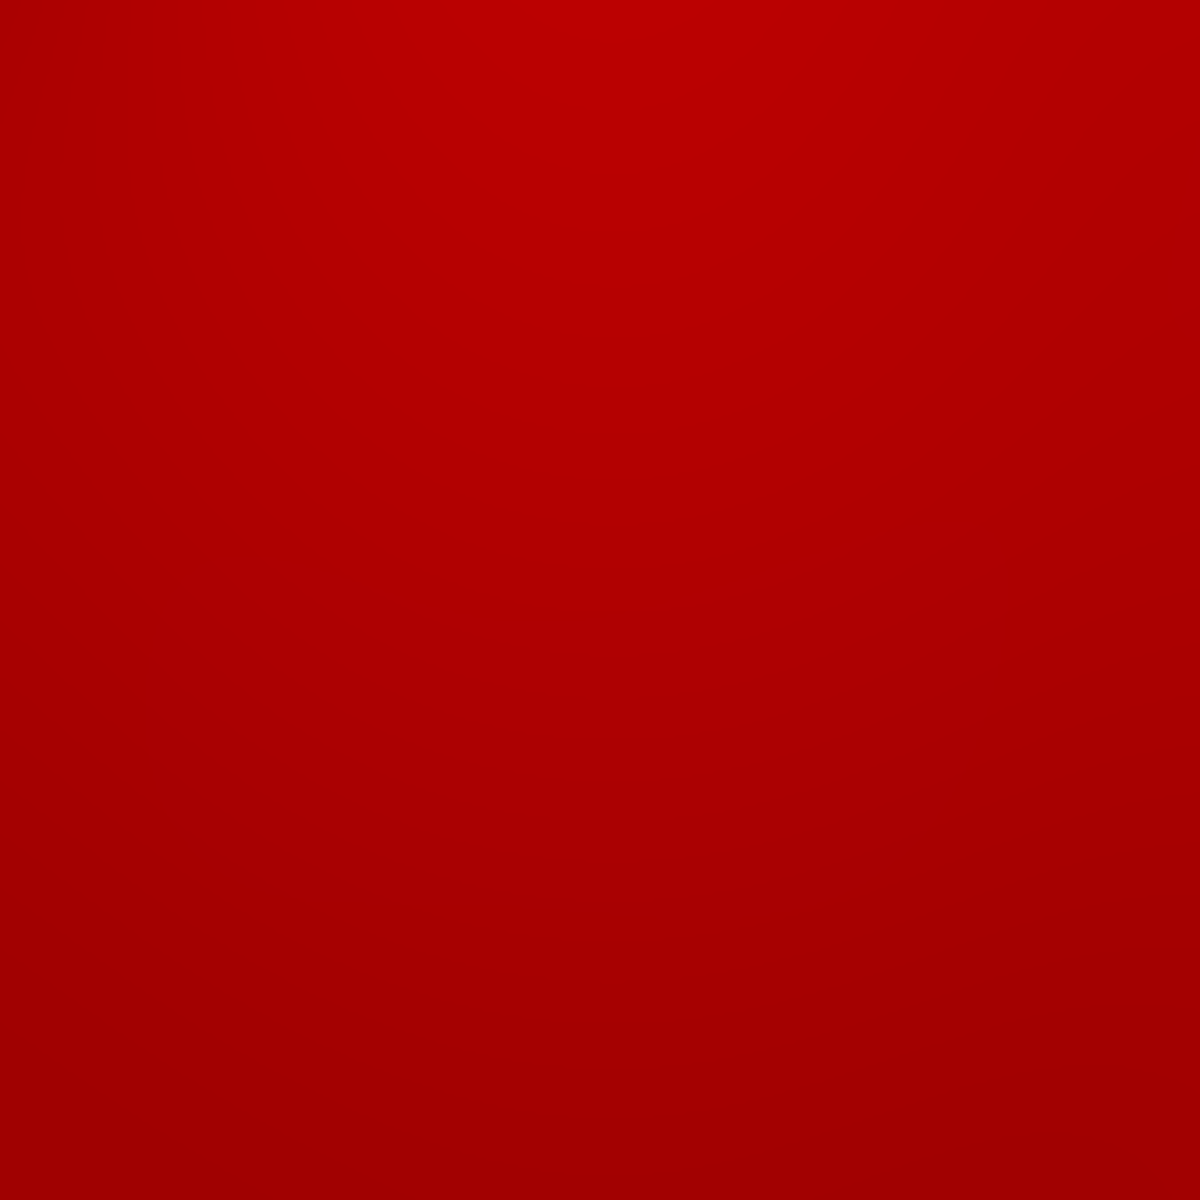 Red Square Gradient Background